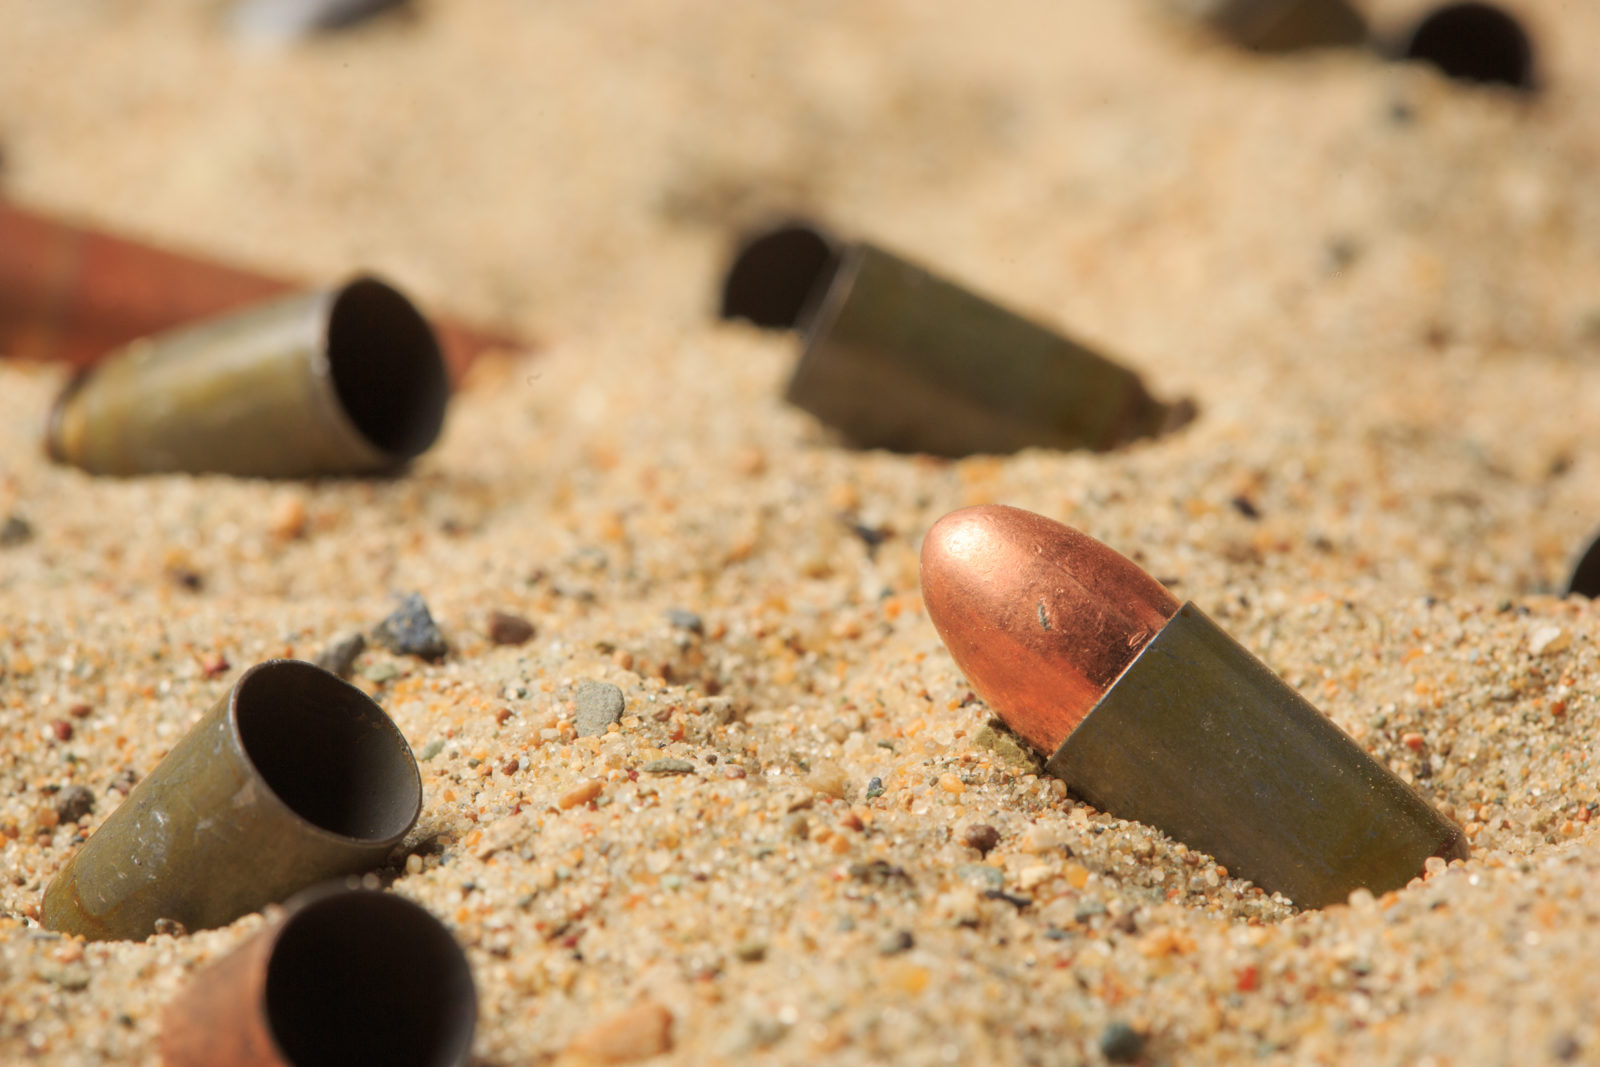 cartridge cases on the sand.